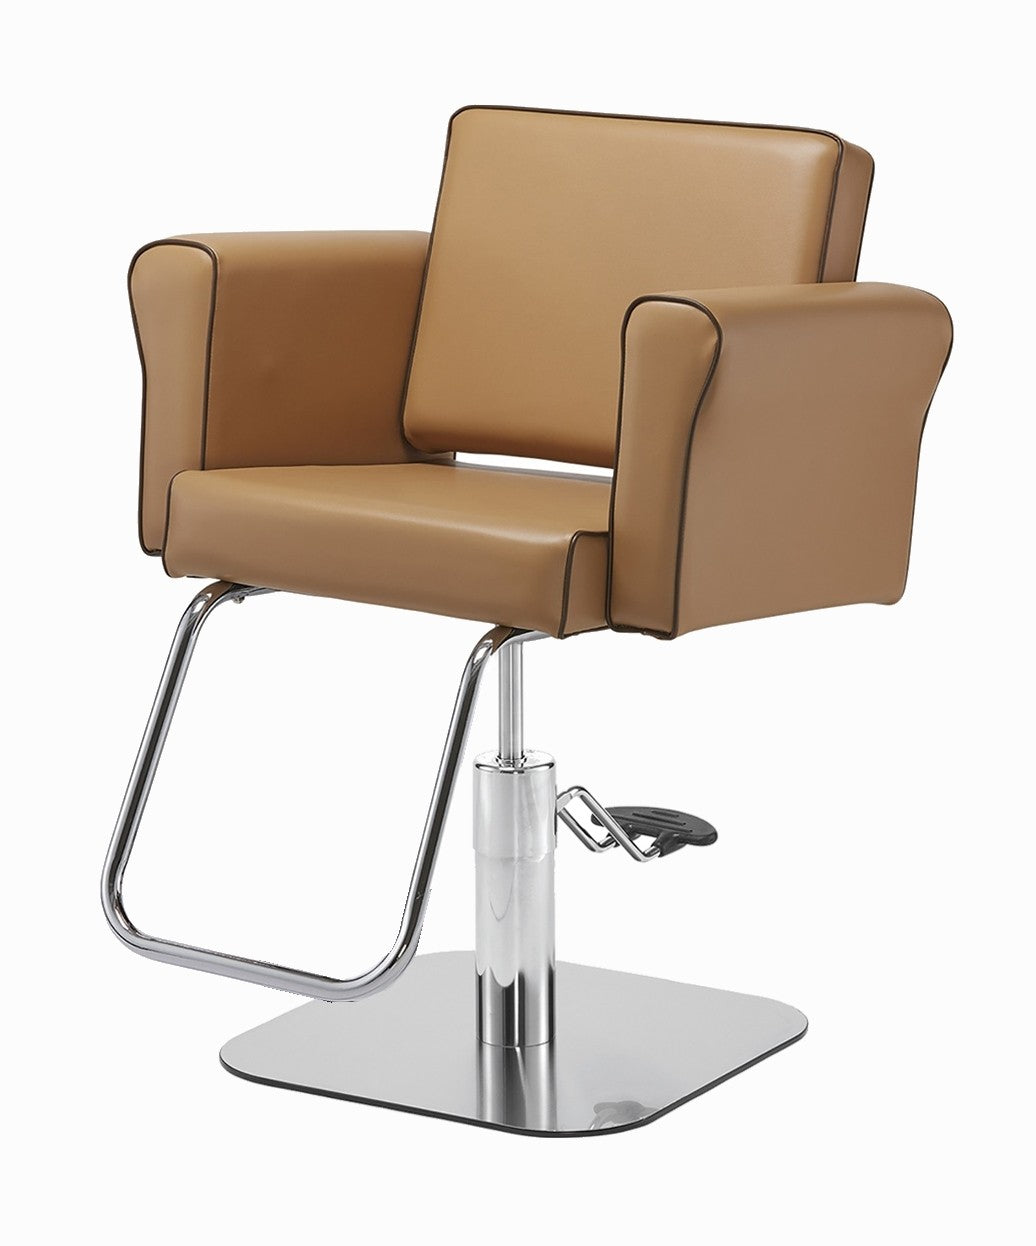 Pibbs Claire Styling Chair